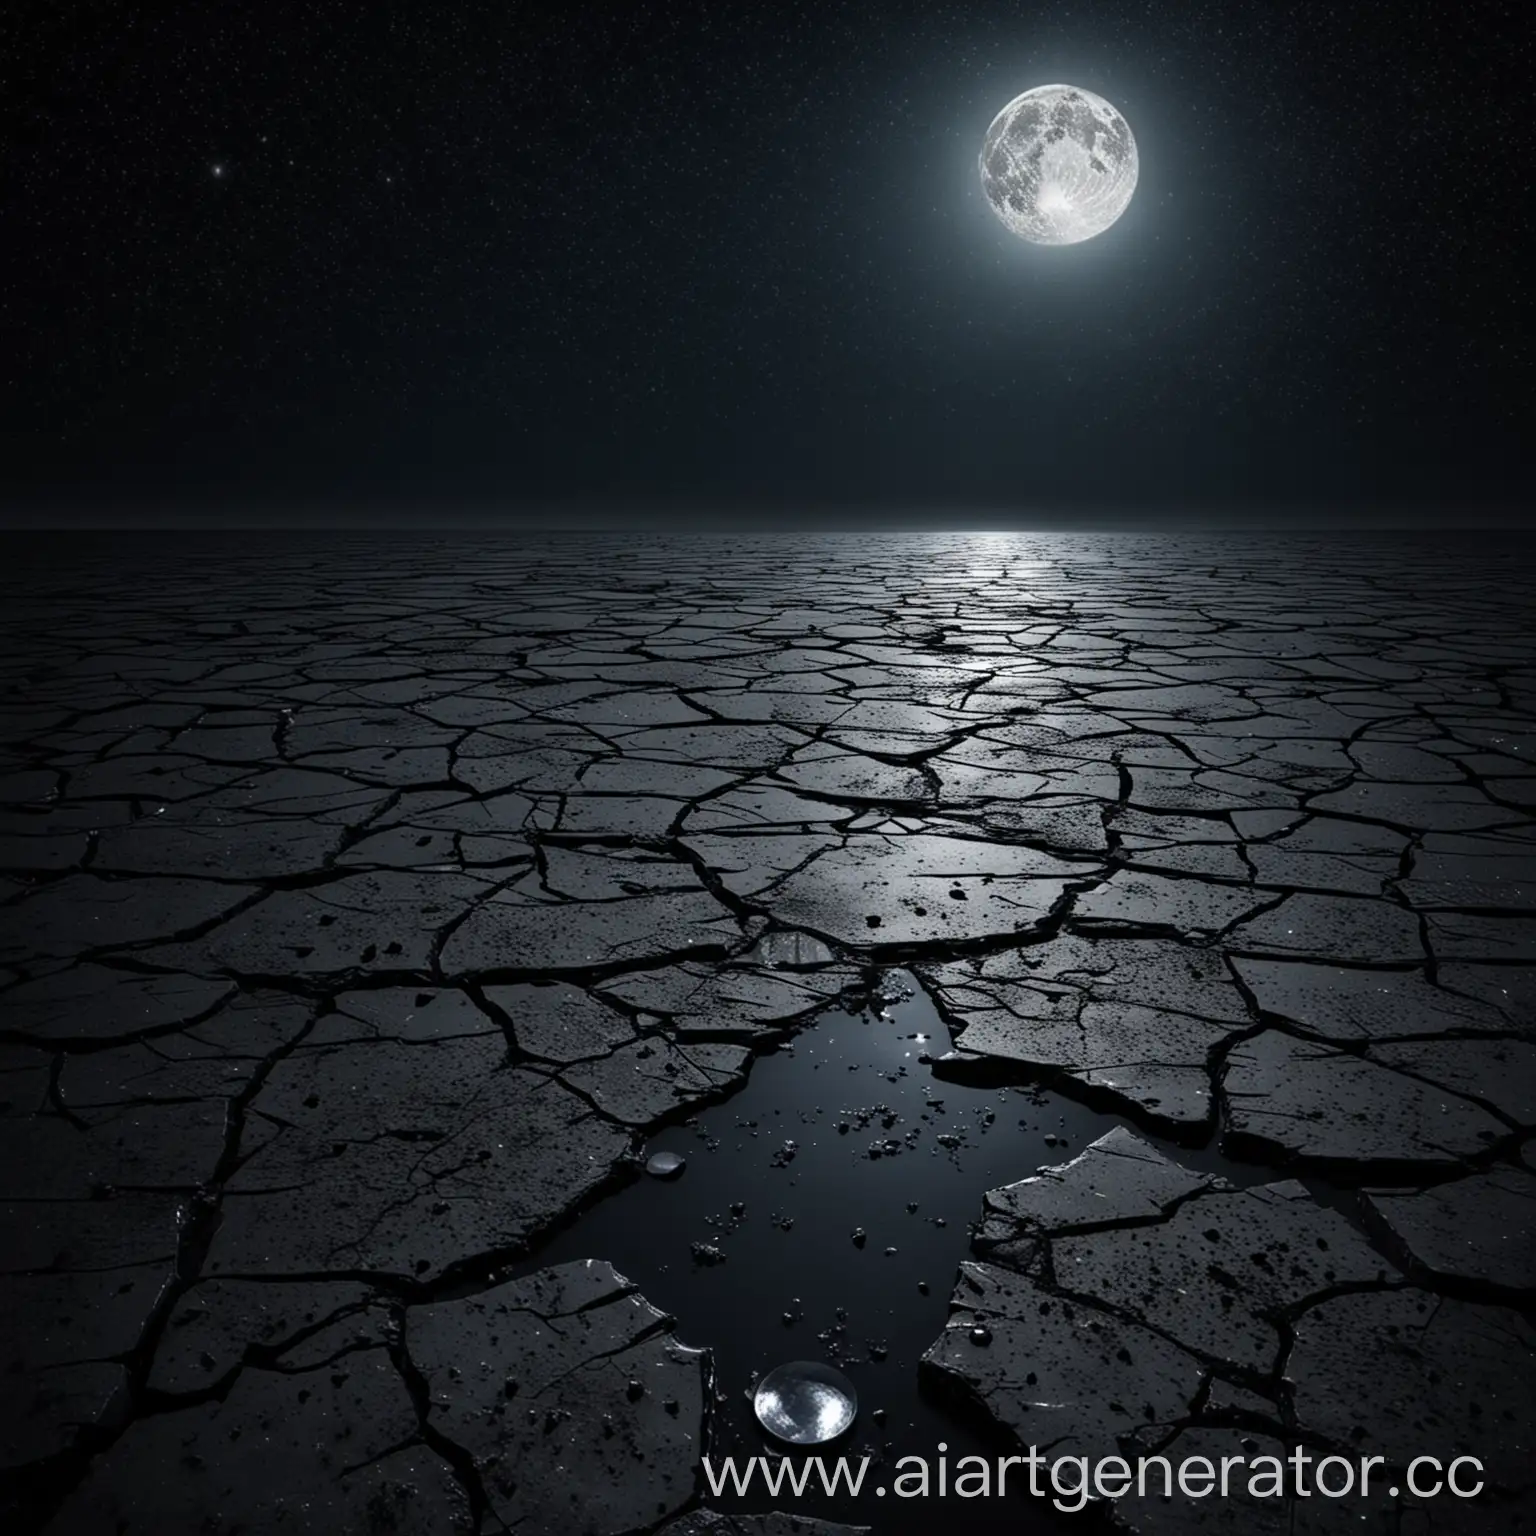 Nocturnal-Scene-Black-Water-Cracked-Ice-Night-Sky-with-Stars-and-Empty-Moon